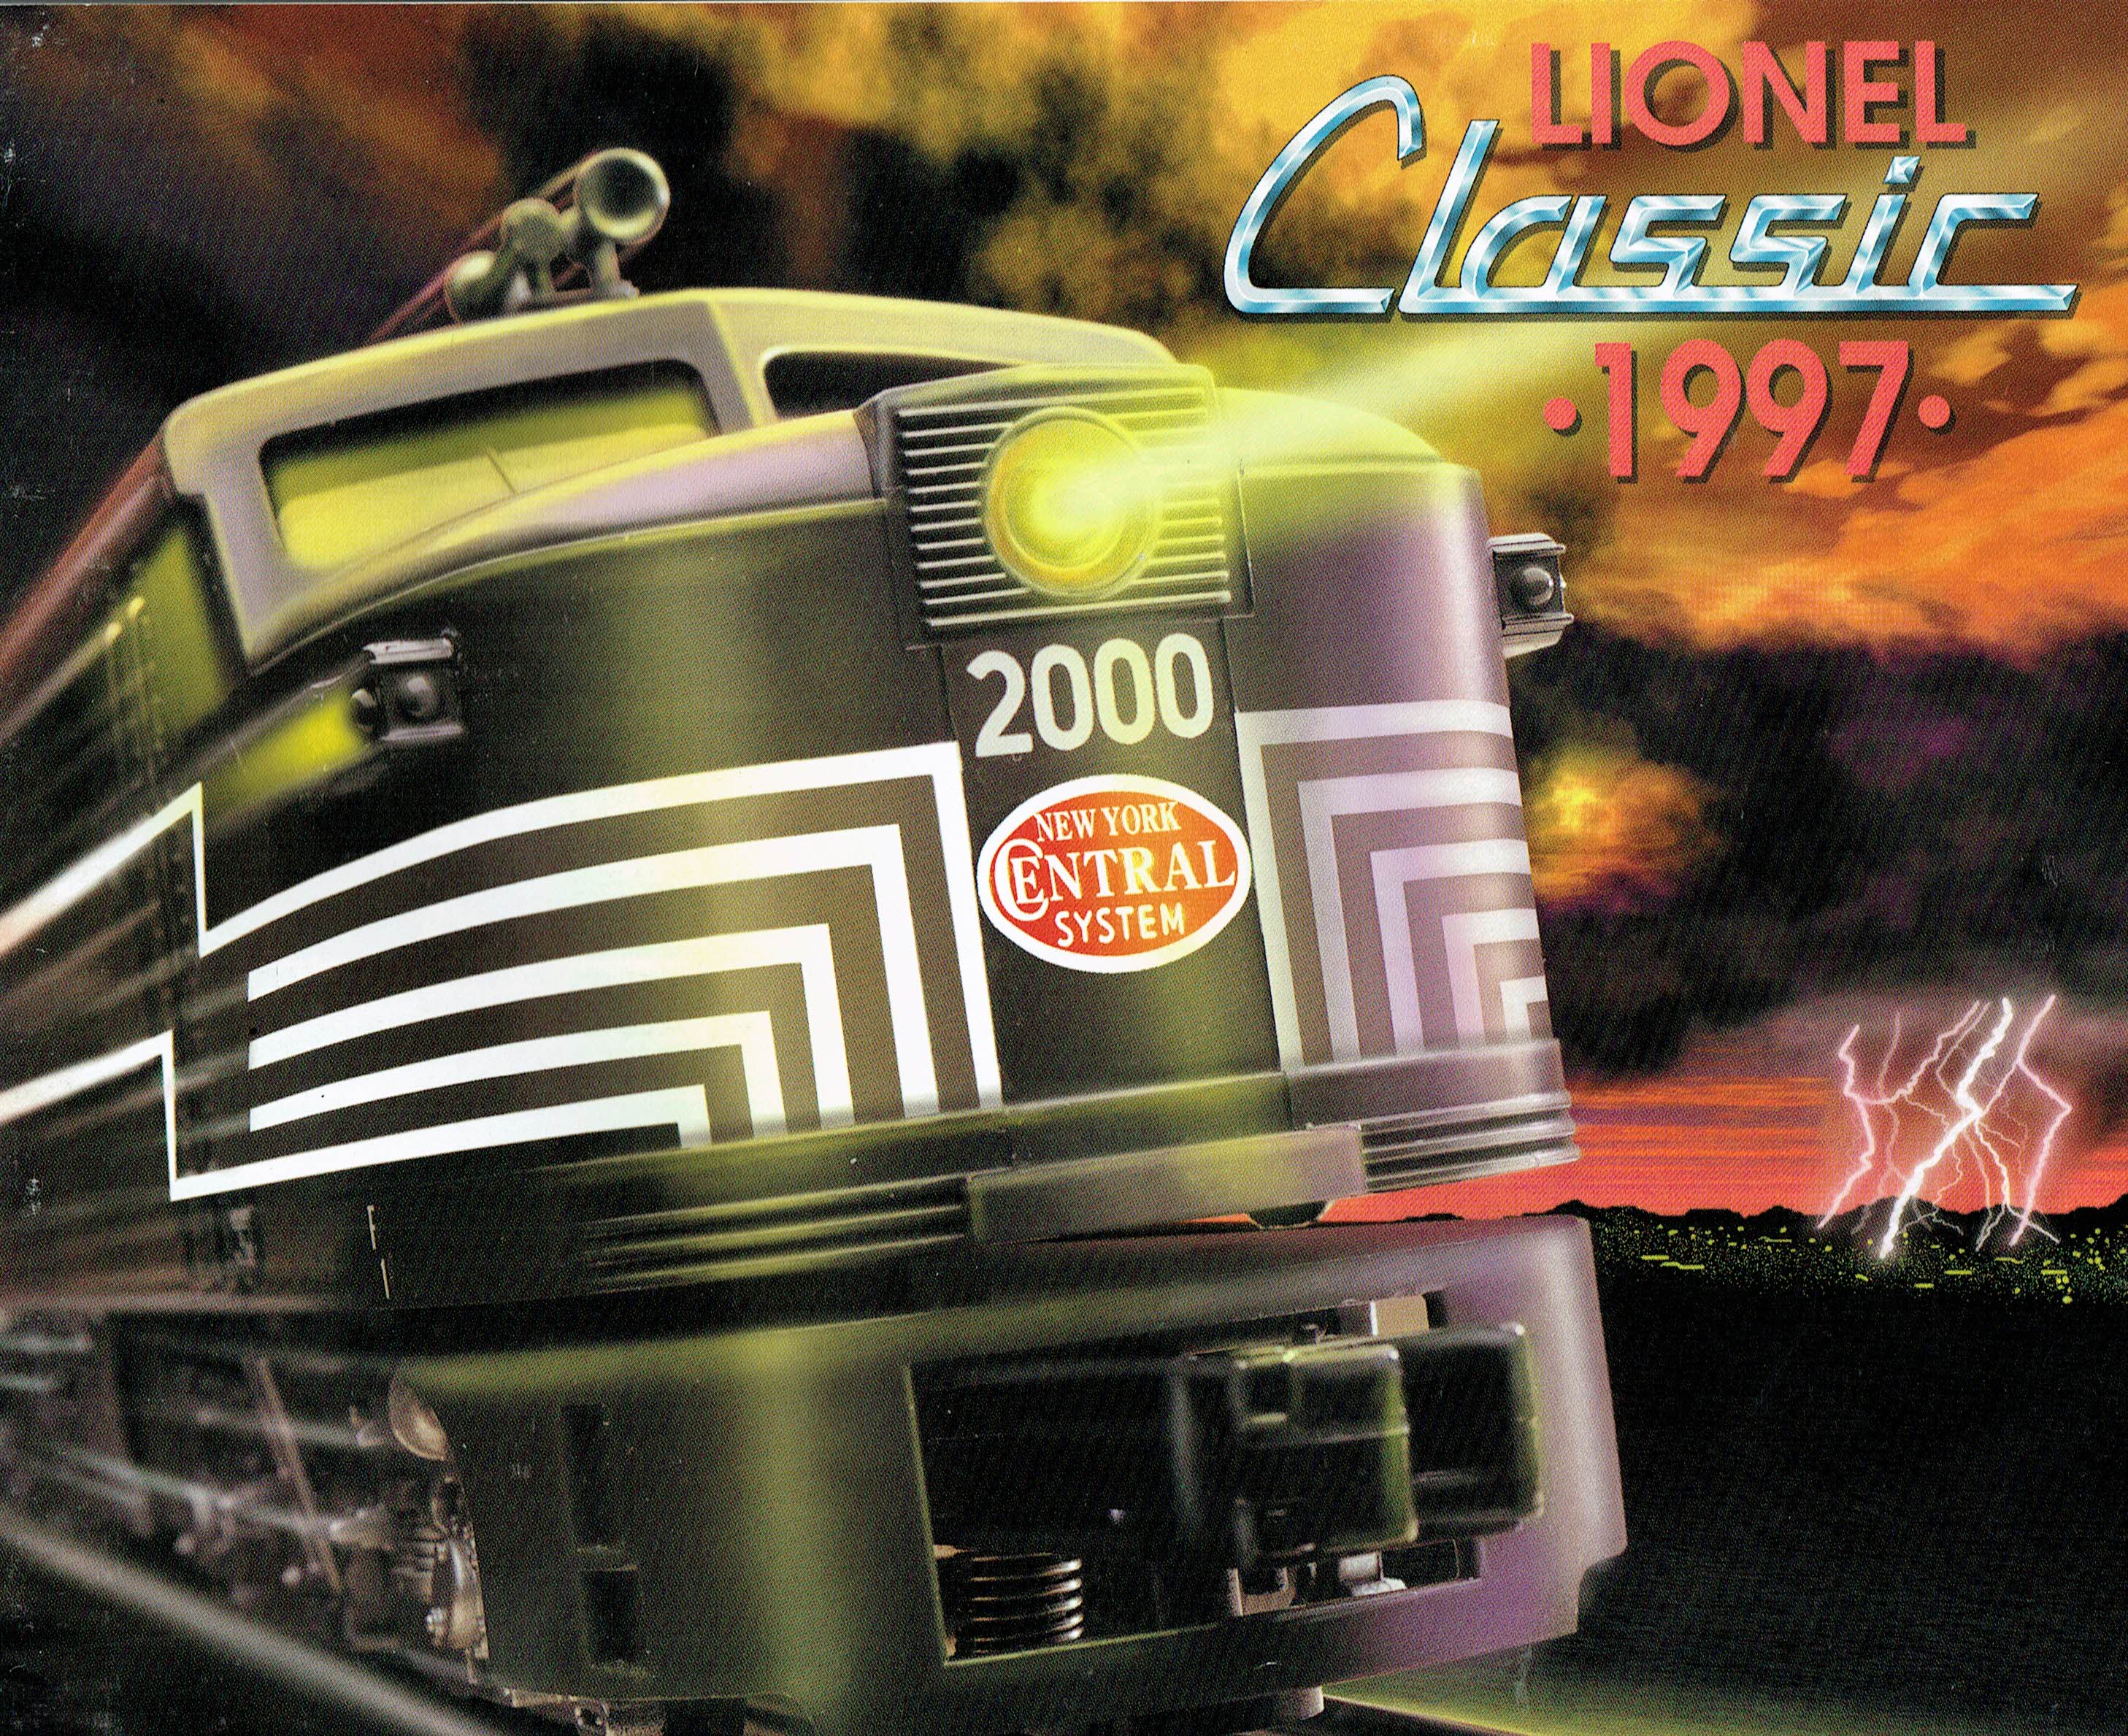 Lionel 1997 Classic (NYC diesel on cover) Catalog image